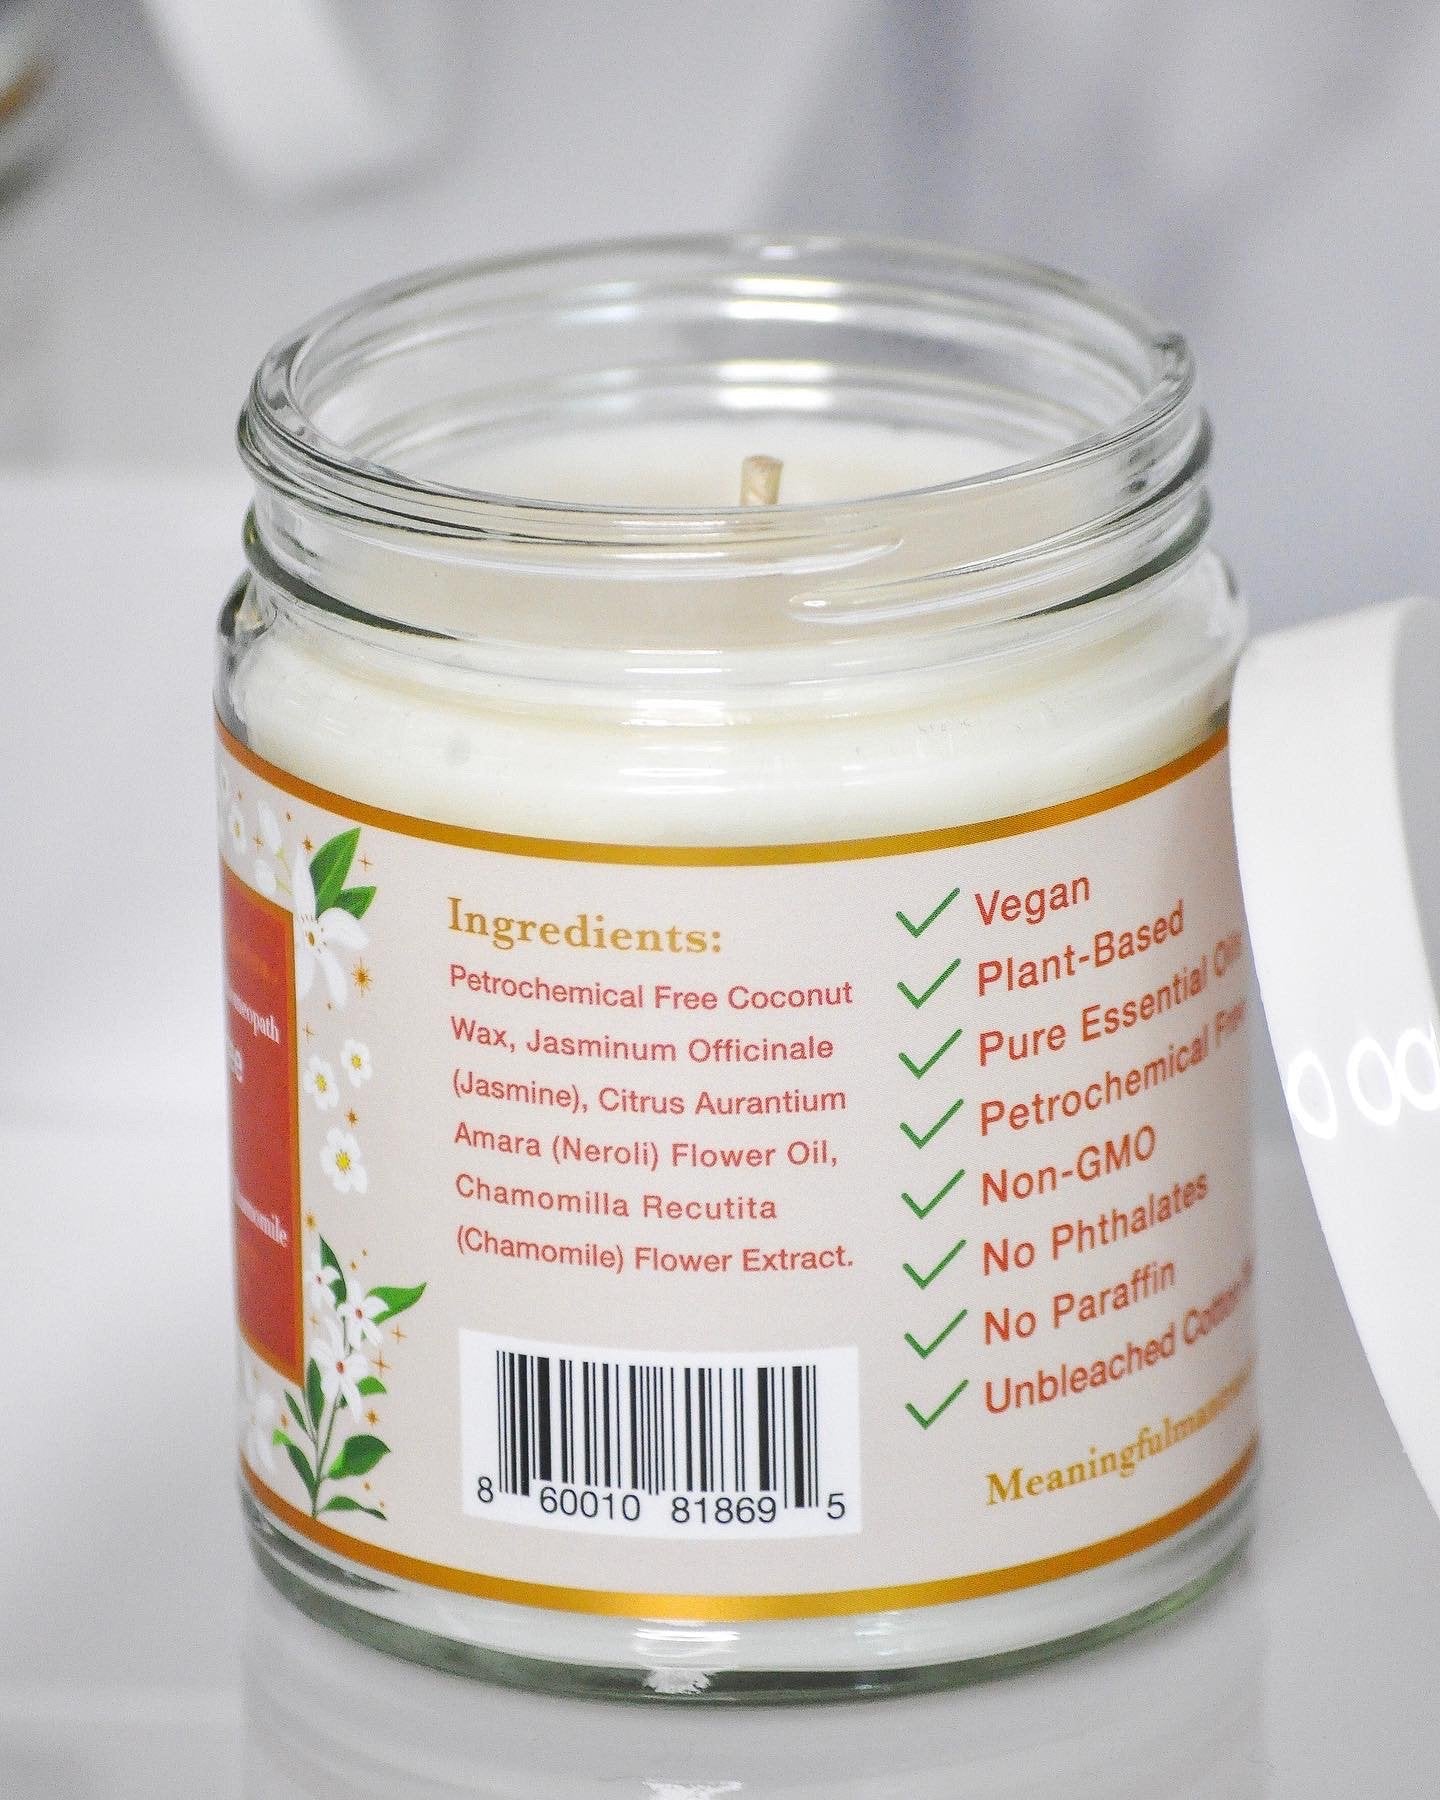 The Enlightened Homeopath x Meaningful Mantras Jasmine Neroli Candle